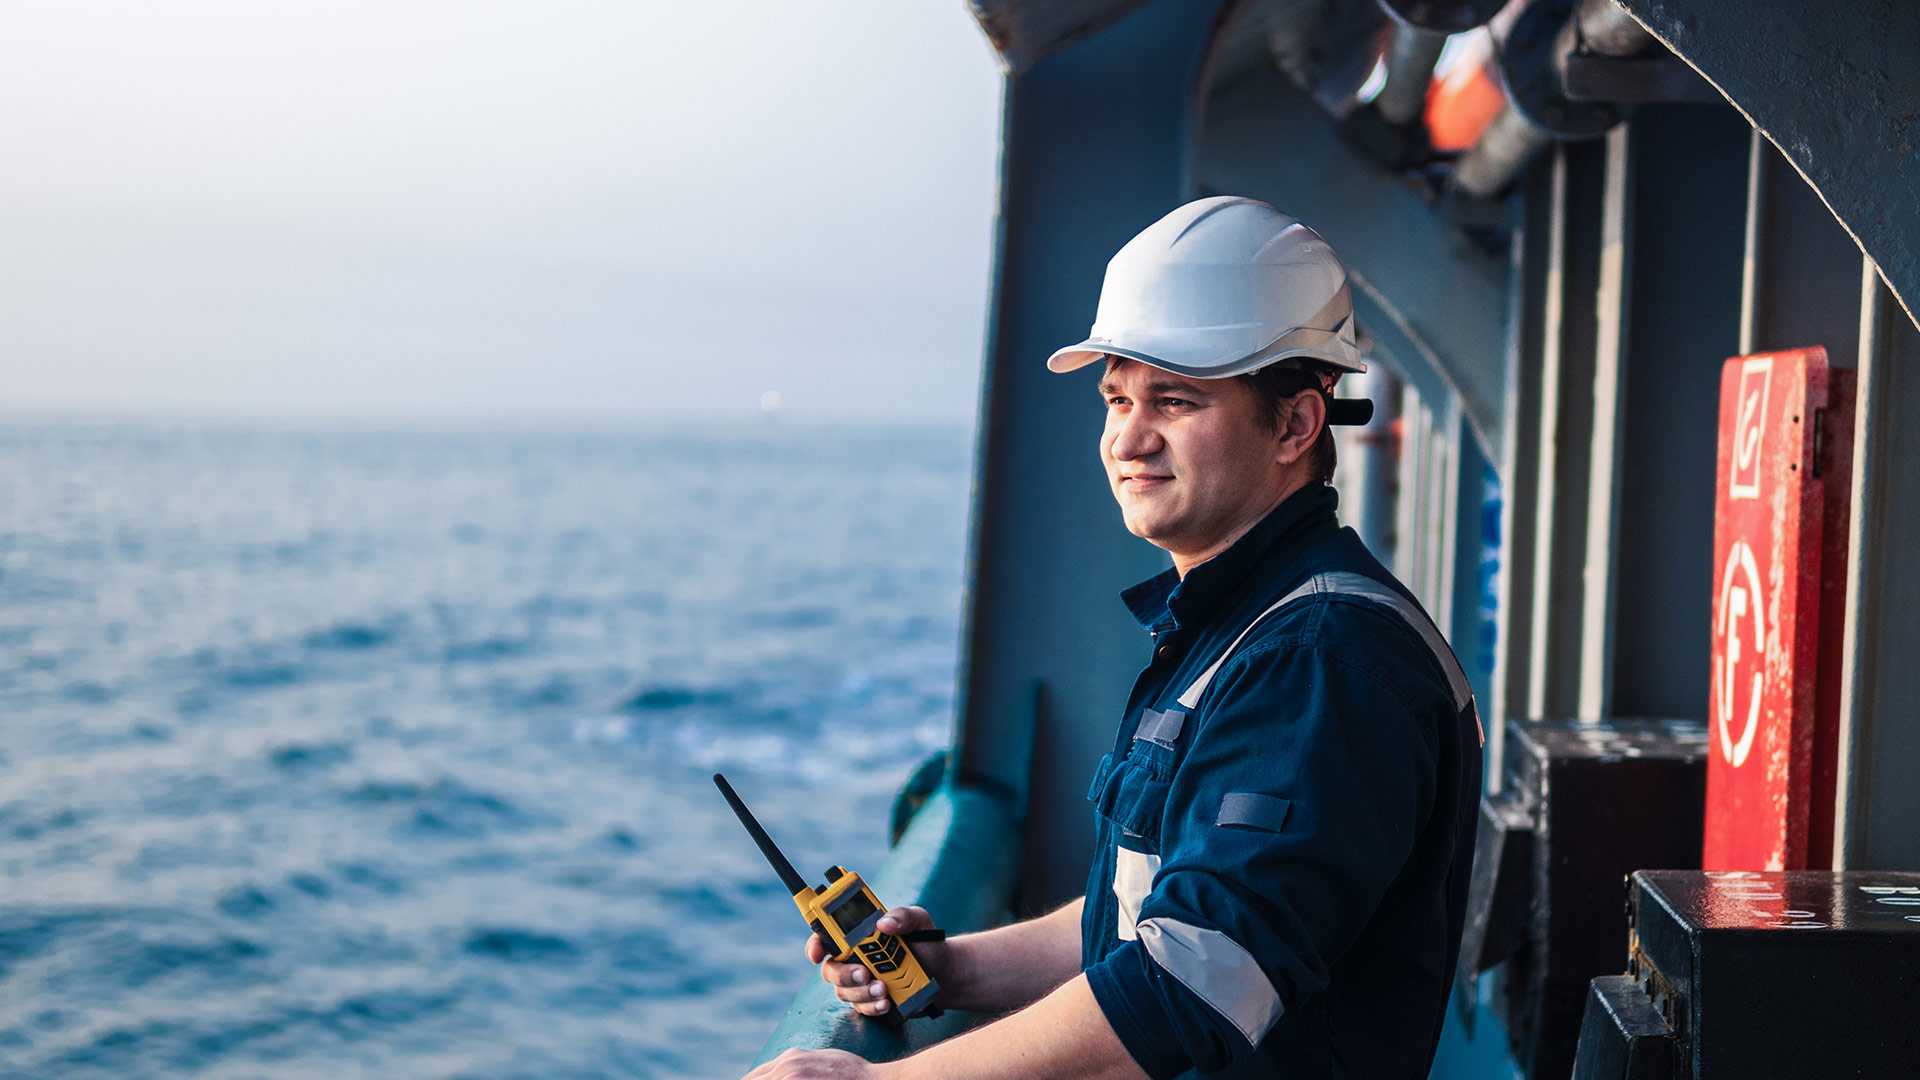 Ship employee stands with a radio on a ship at sea